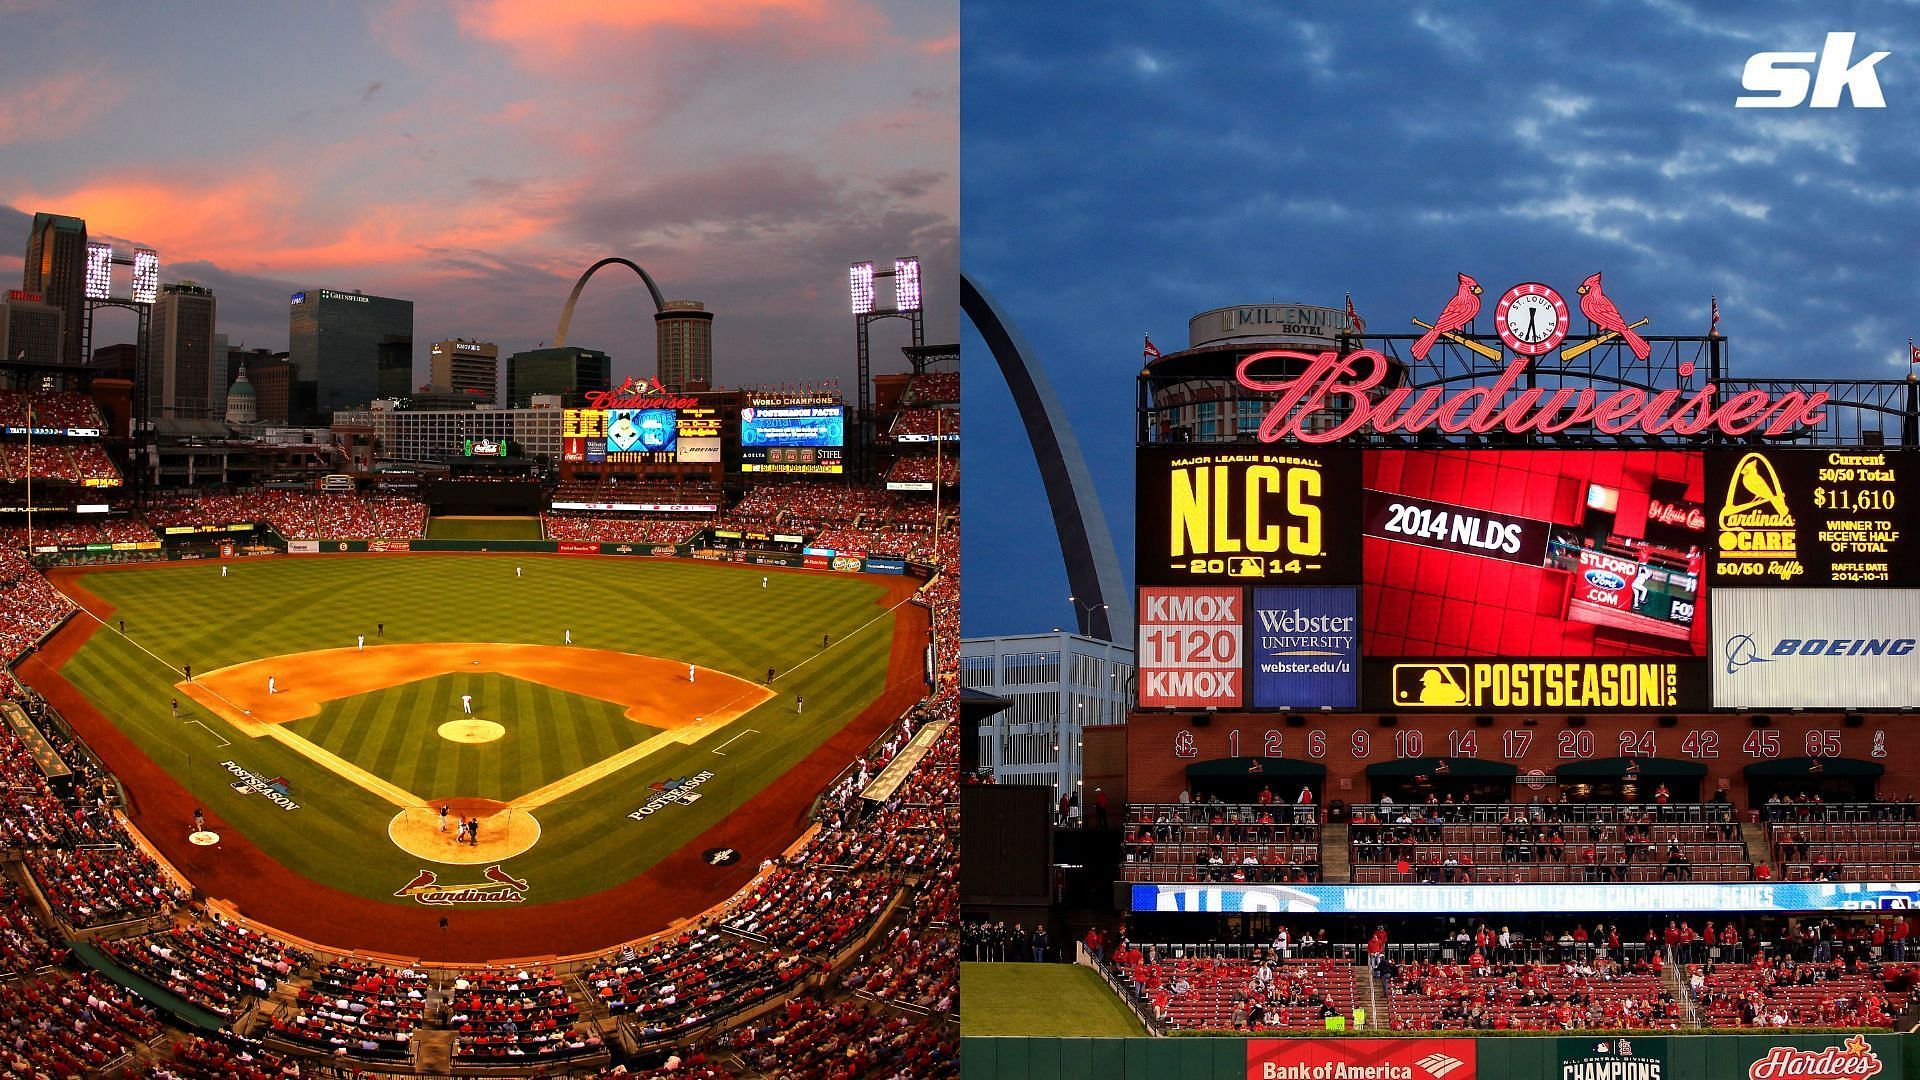 The owners of the St. Louis Cardinals plan to ask for public funds to complete a renovation at Busch Stadium